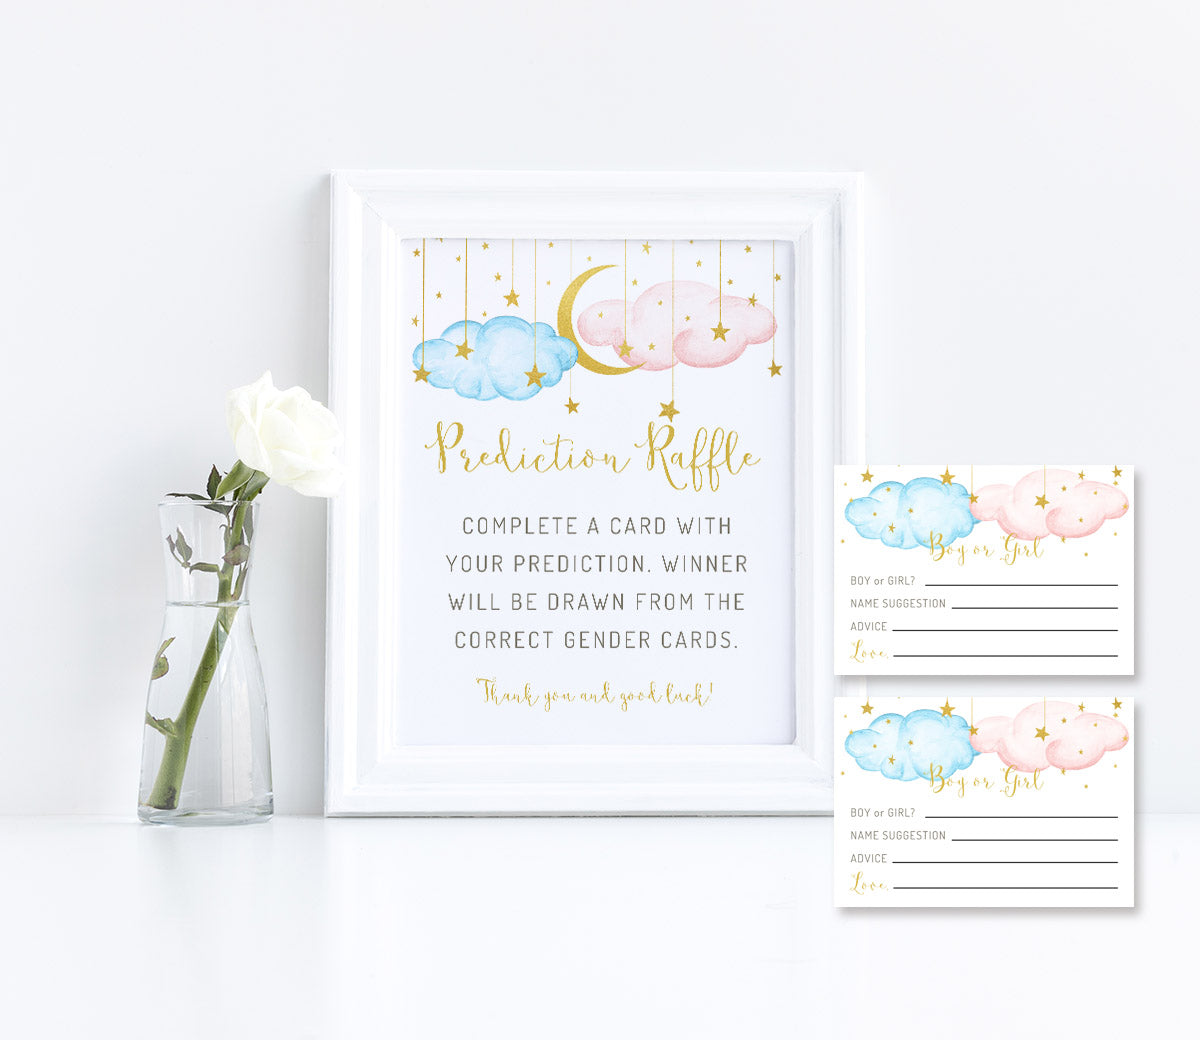 Twinkle twinkle little star baby gender prediction game and entry card, blue and pink clouds with a gold moon and stars, editable templates from Artful Life Designs